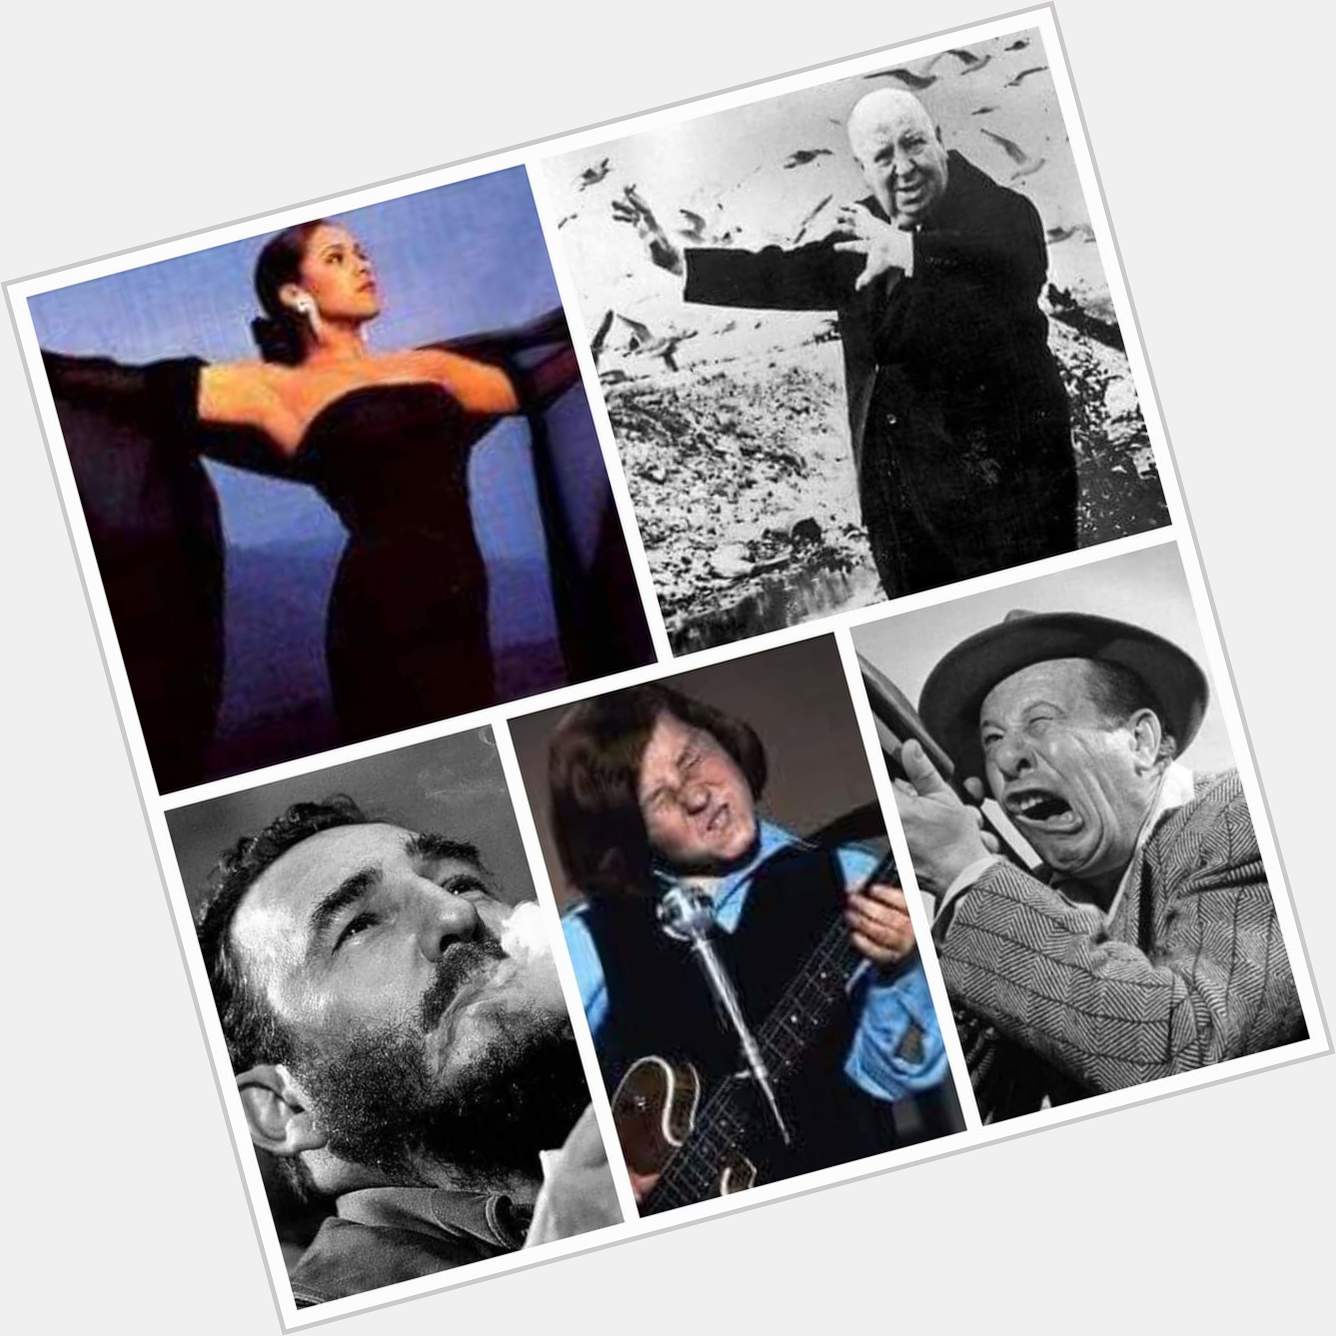 August 13th 
Happy Birthday to Kathleen Battle, Alfred Hitchcock, Fidel Castro, Danny Bonaduce, and Bert Lahr! 